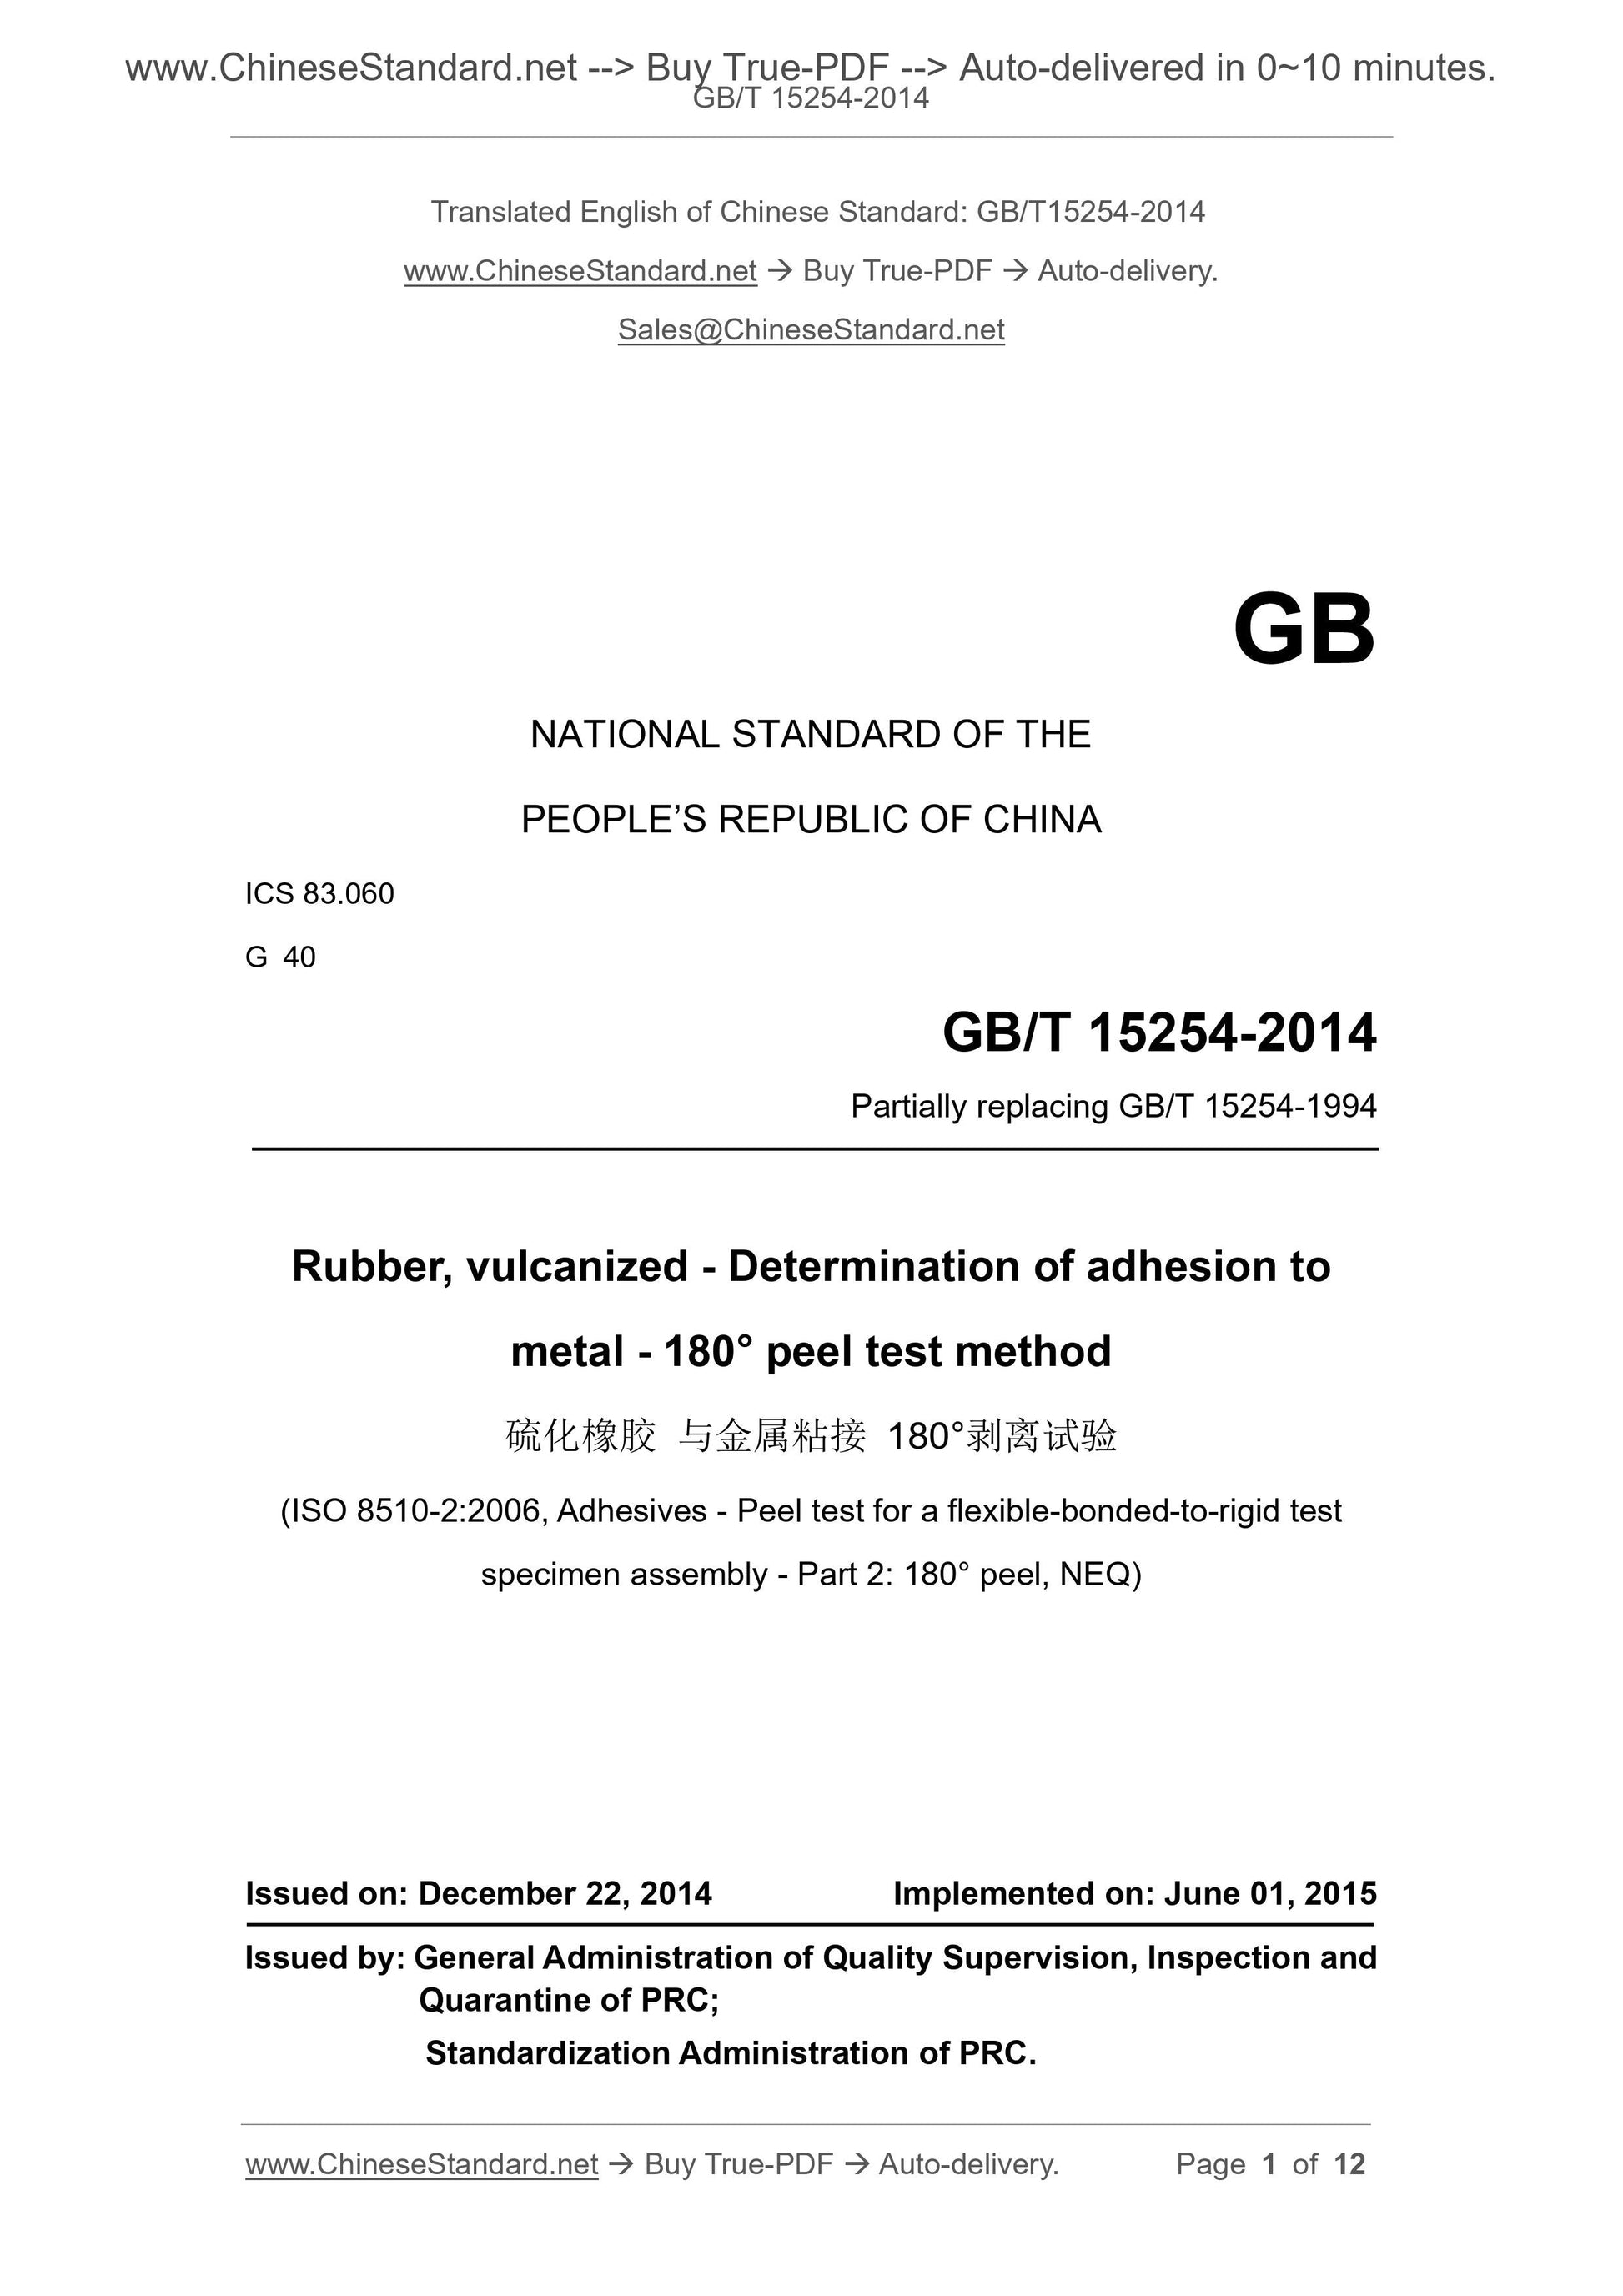 GB/T 15254-2014 Page 1